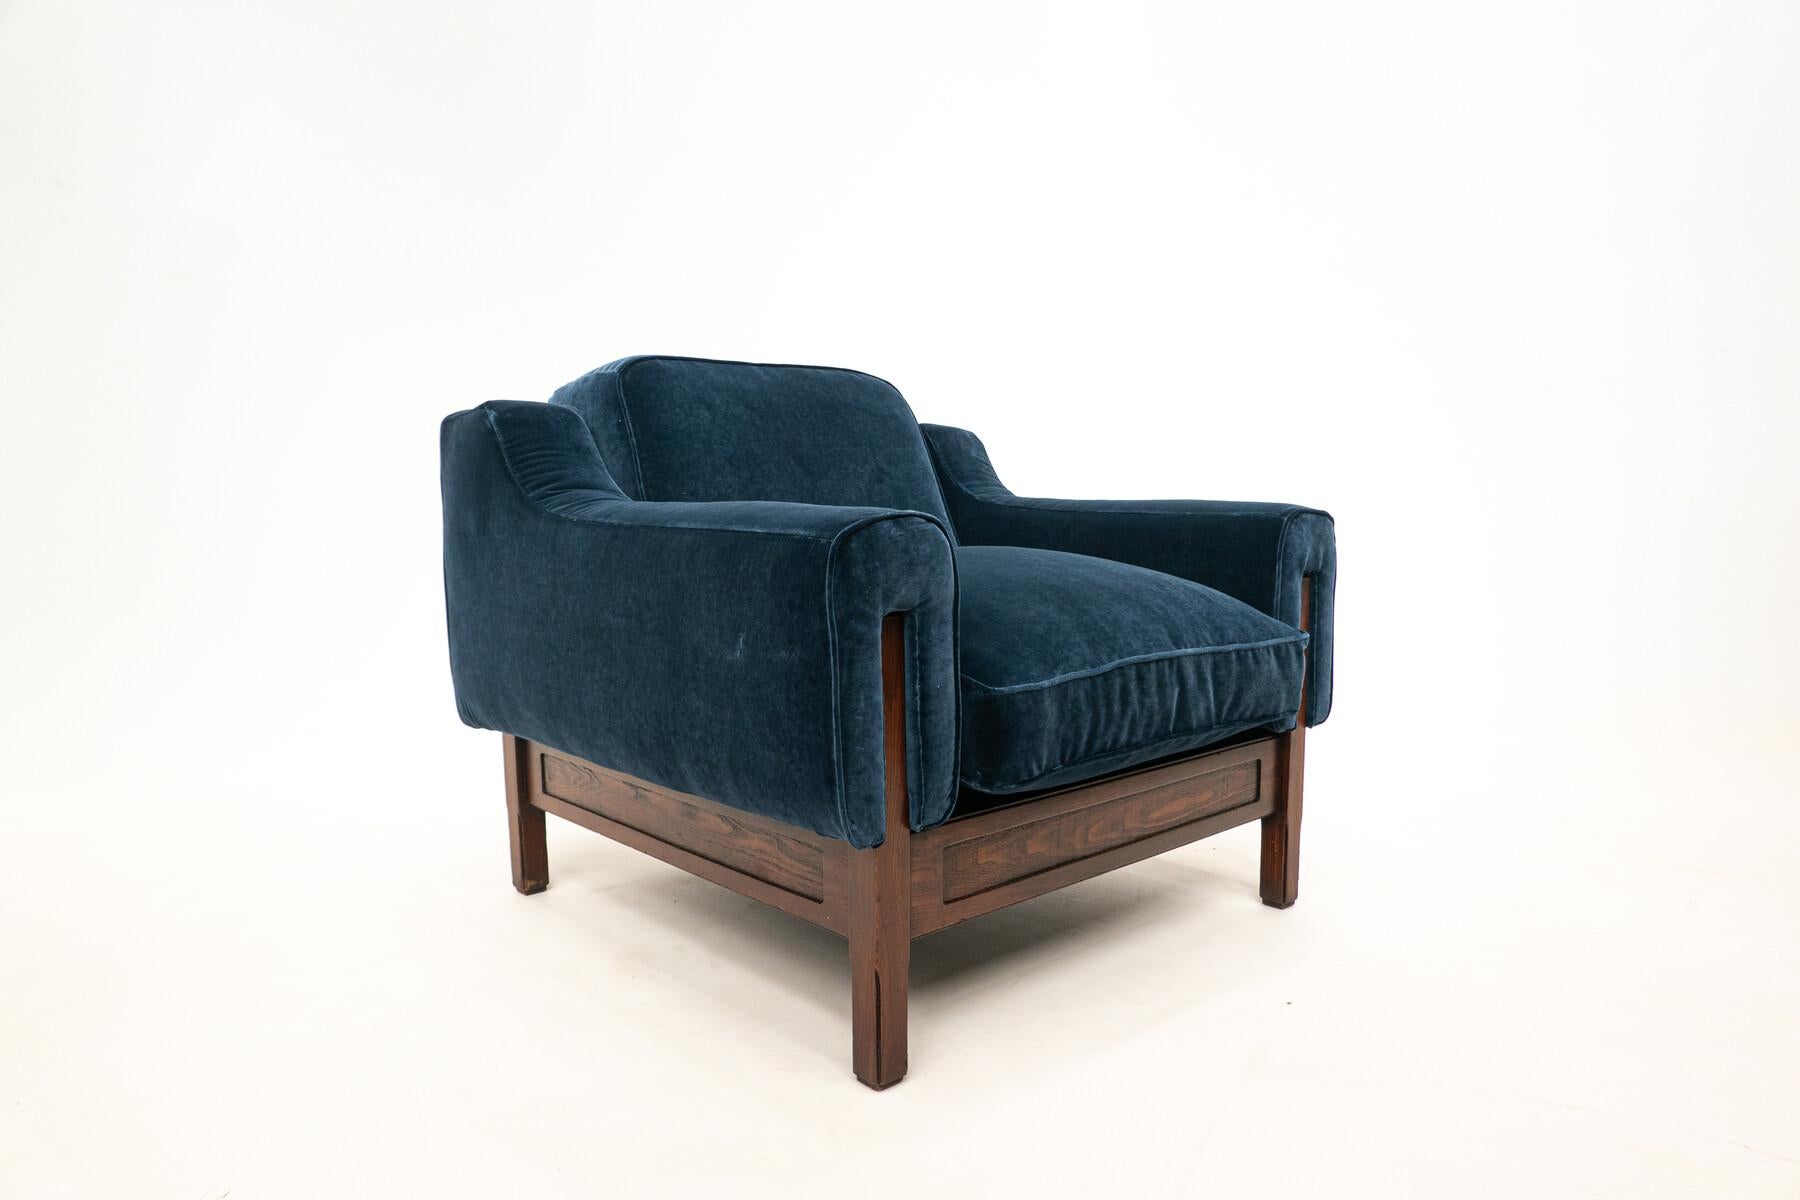 Mid-20th Century Mid-Century Modern Italian Pair of Amrchairs, Wood and Blue Velvet, 1960s For Sale